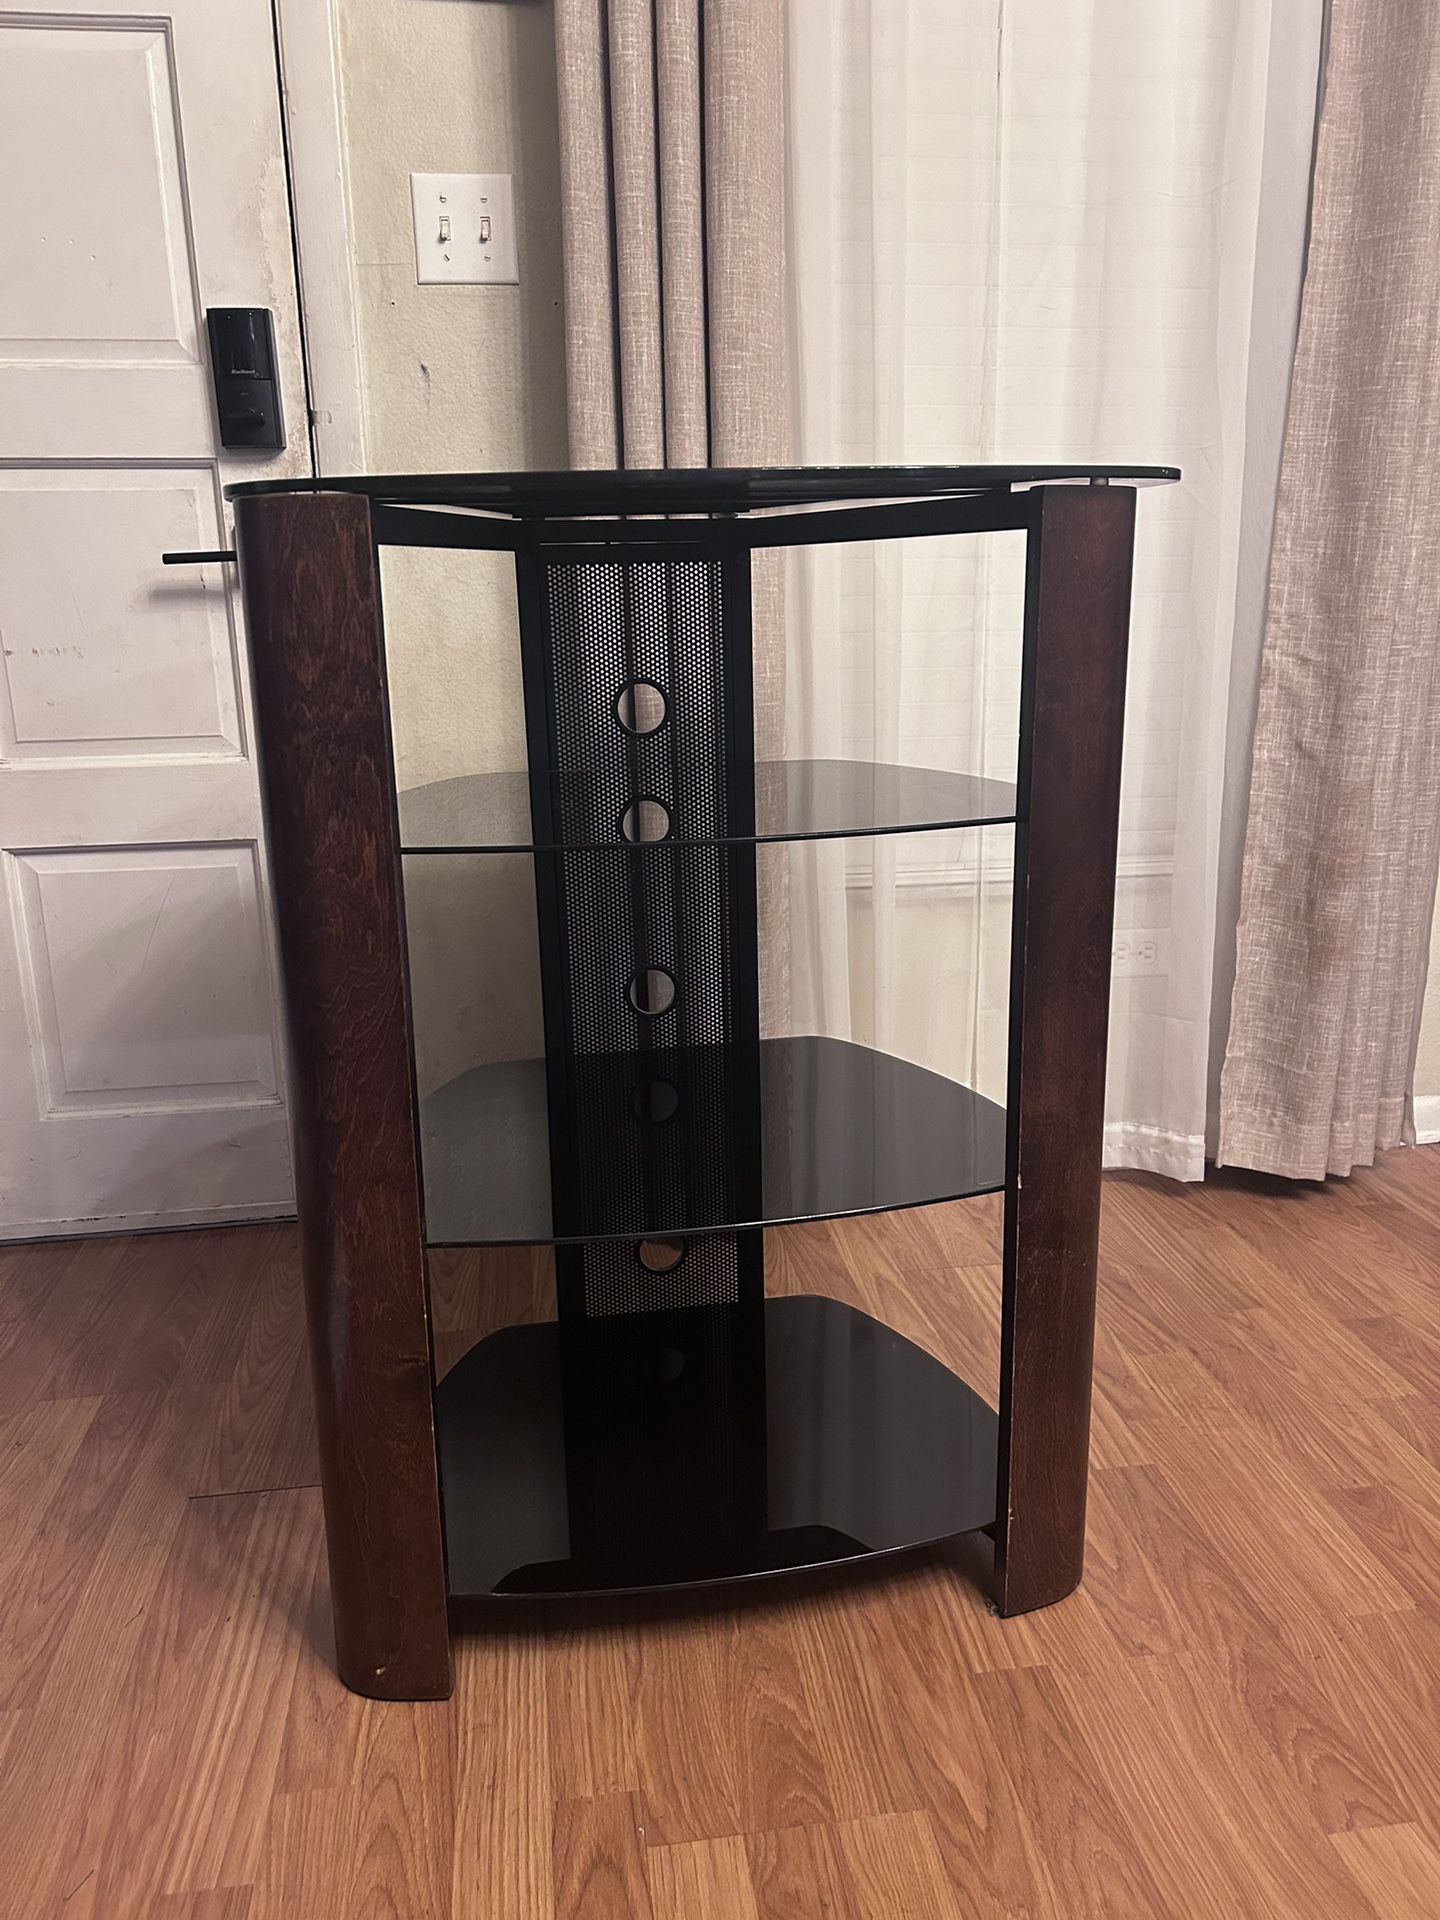 TV Stand - Audio Visual Tower